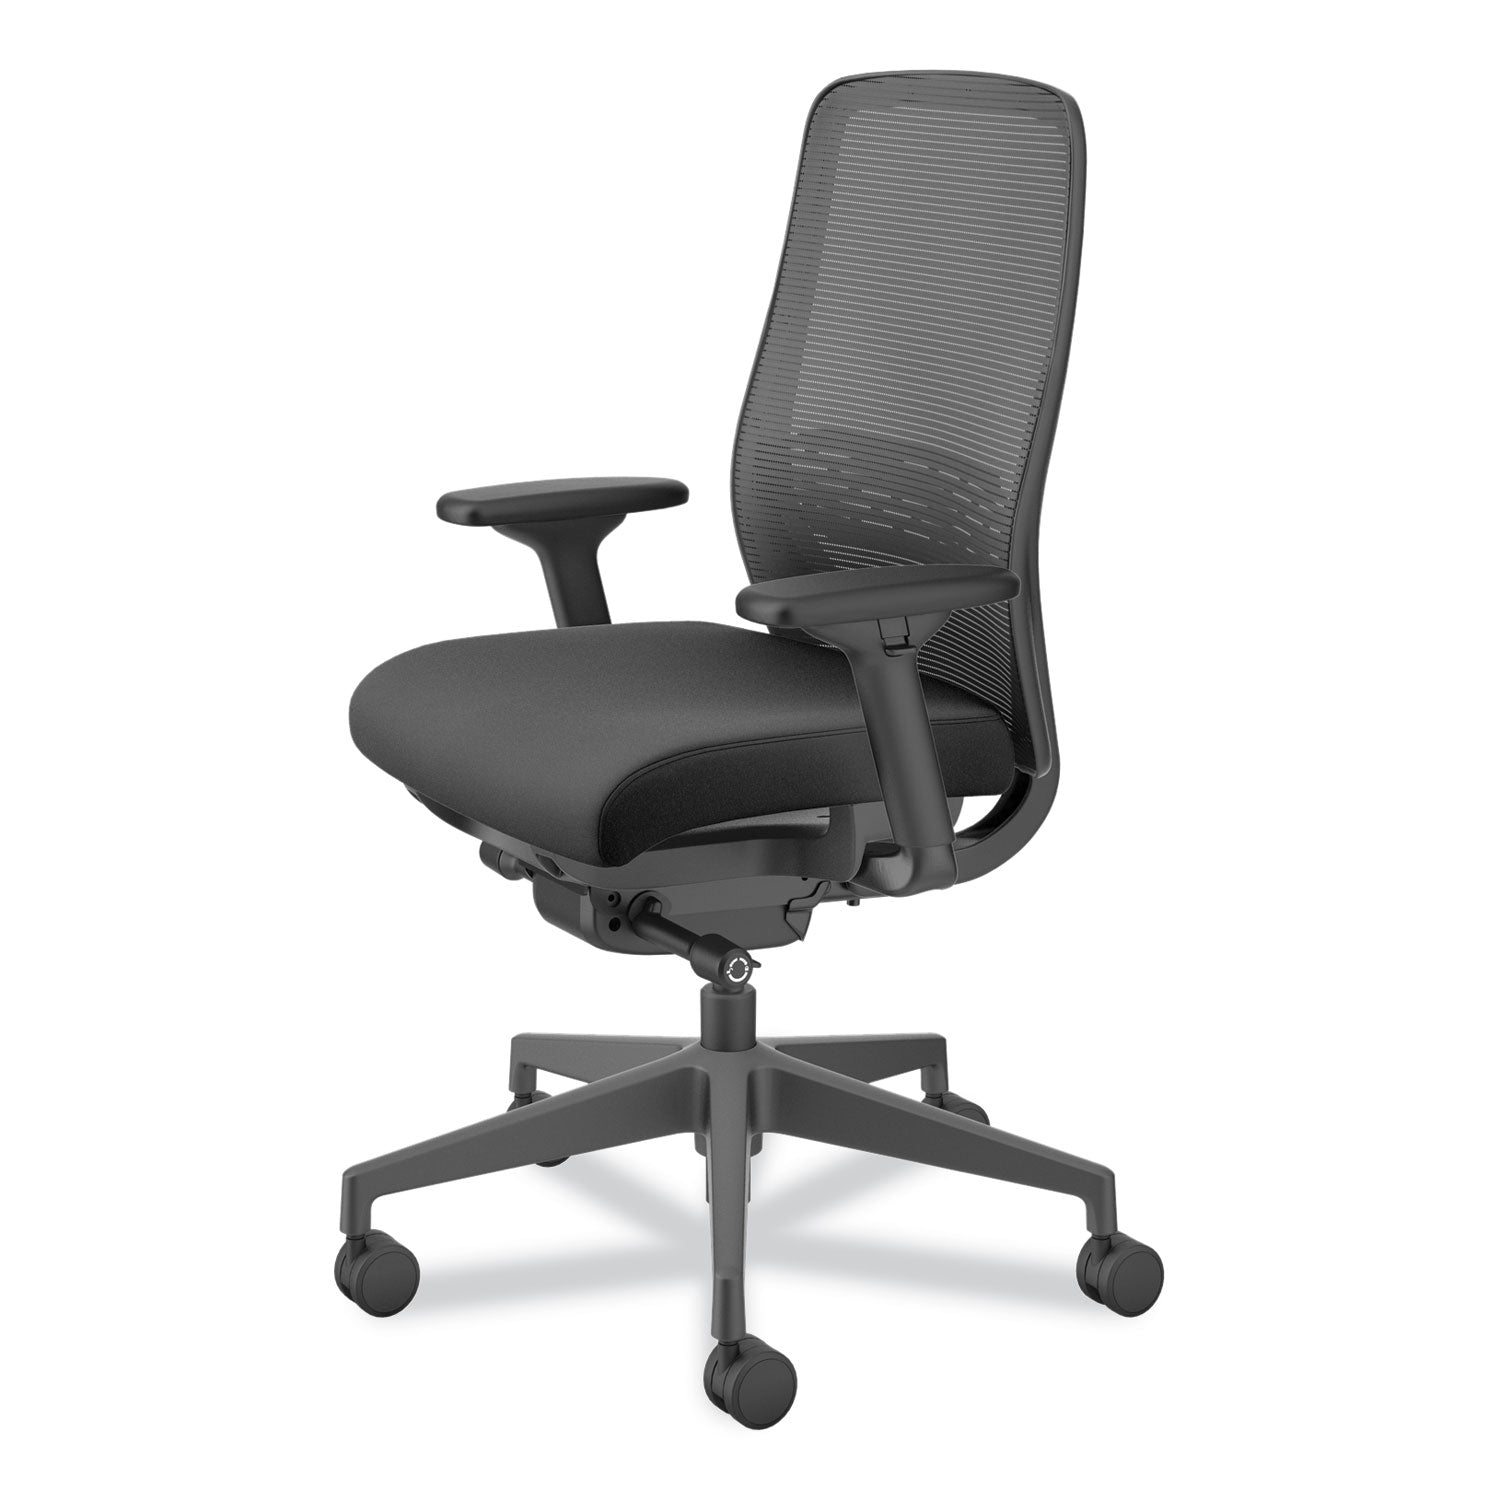 nucleus-series-recharge-task-chair-supports-up-to-300-lb-1663-to-2113-seat-height-black-seat-back-black-base_honnr12samc10bt - 7